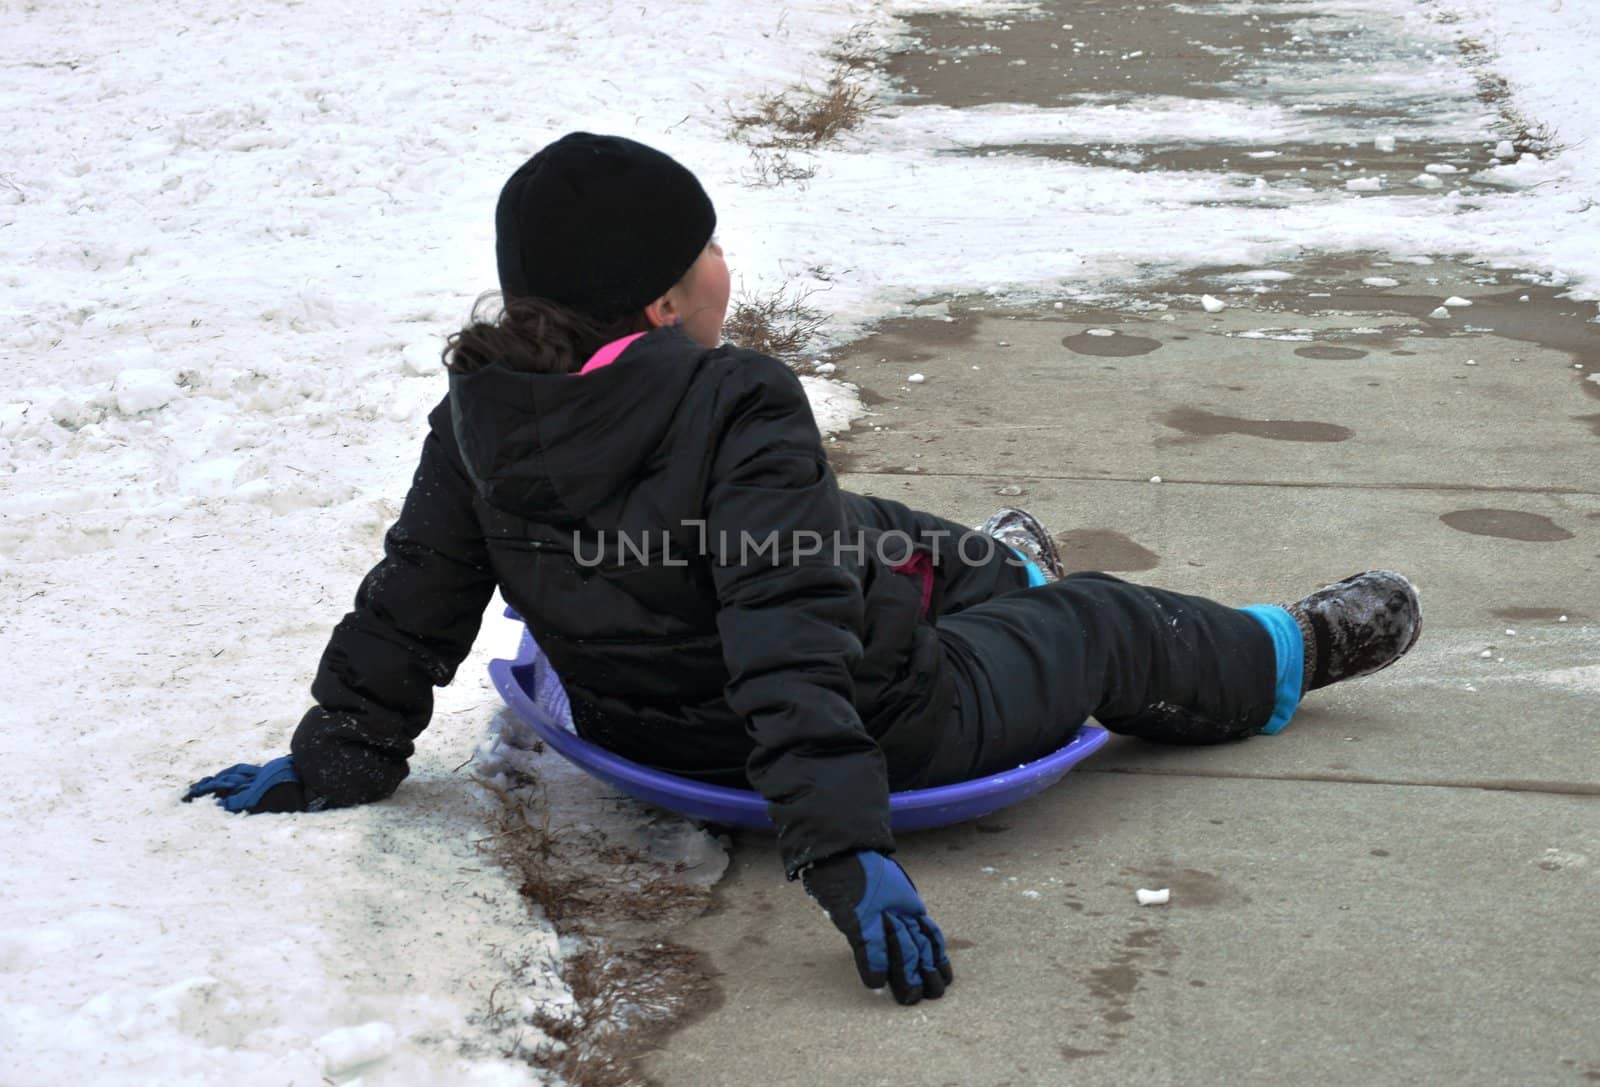 sledding at the bottom of the hill